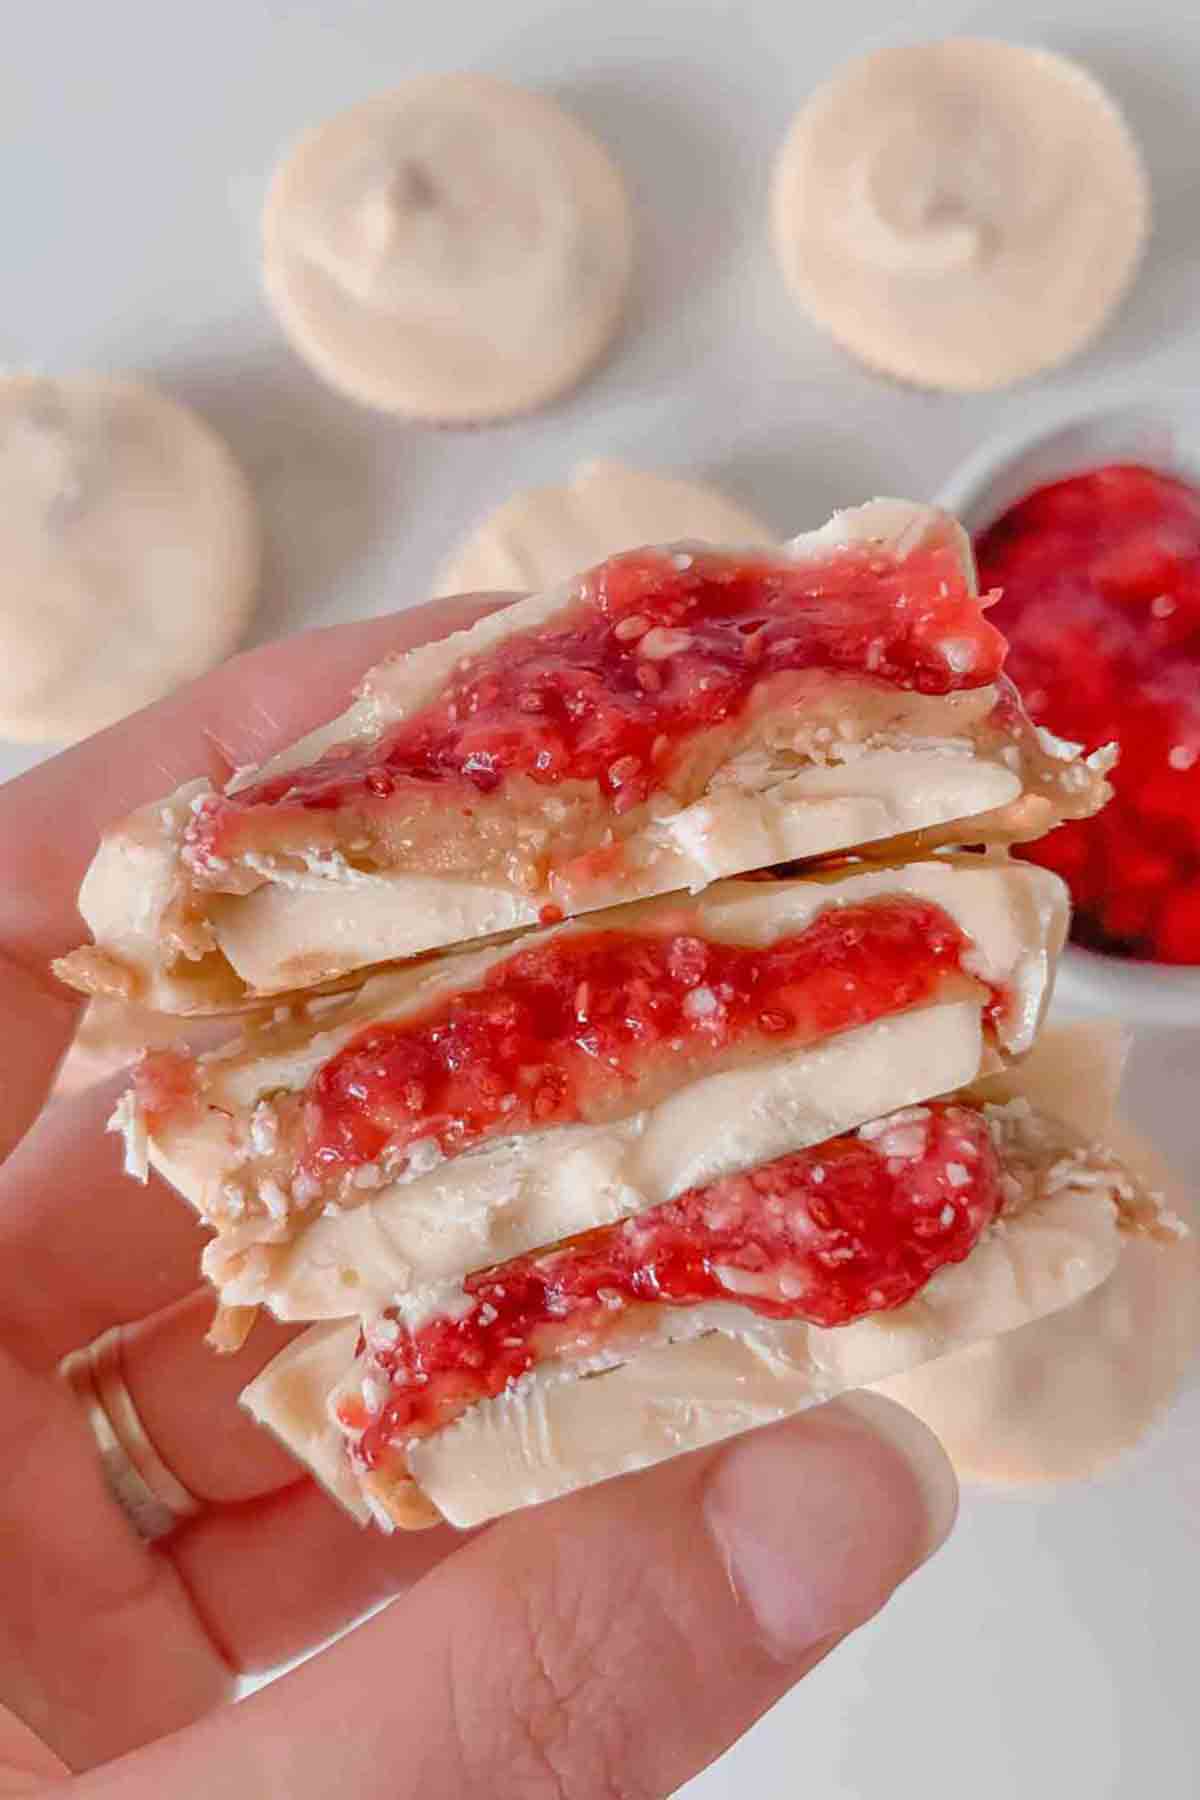 White Chocolate Peanut Butter And Jam Cups